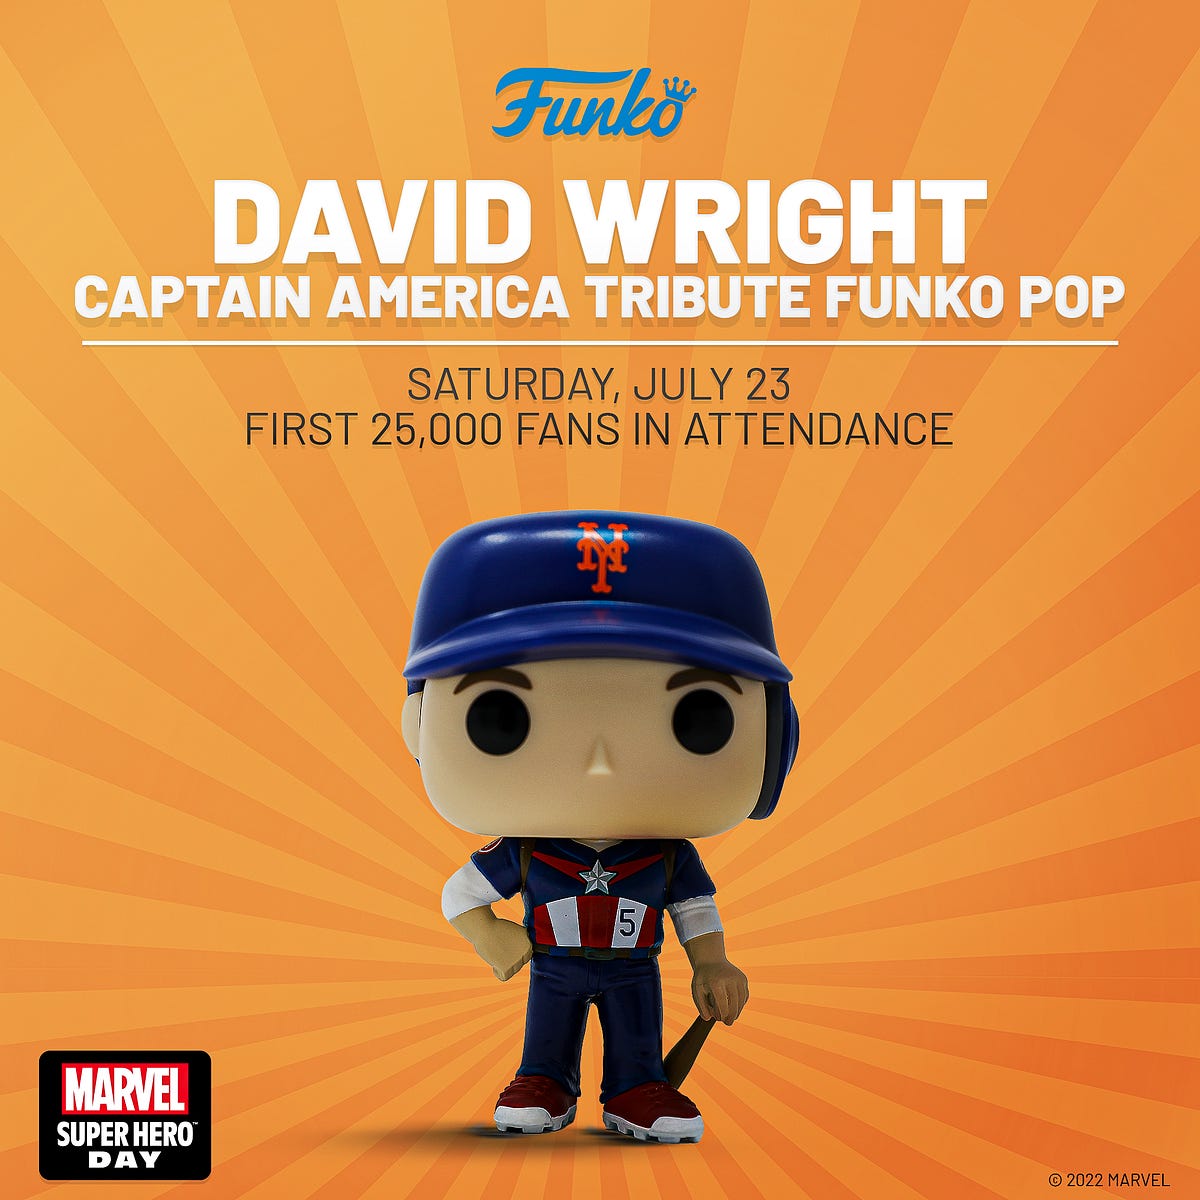 METS ANNOUNCE DAVID WRIGHT CAPTAIN AMERICA TRIBUTE FUNKO POP! COLLECTIBLE, by New York Mets